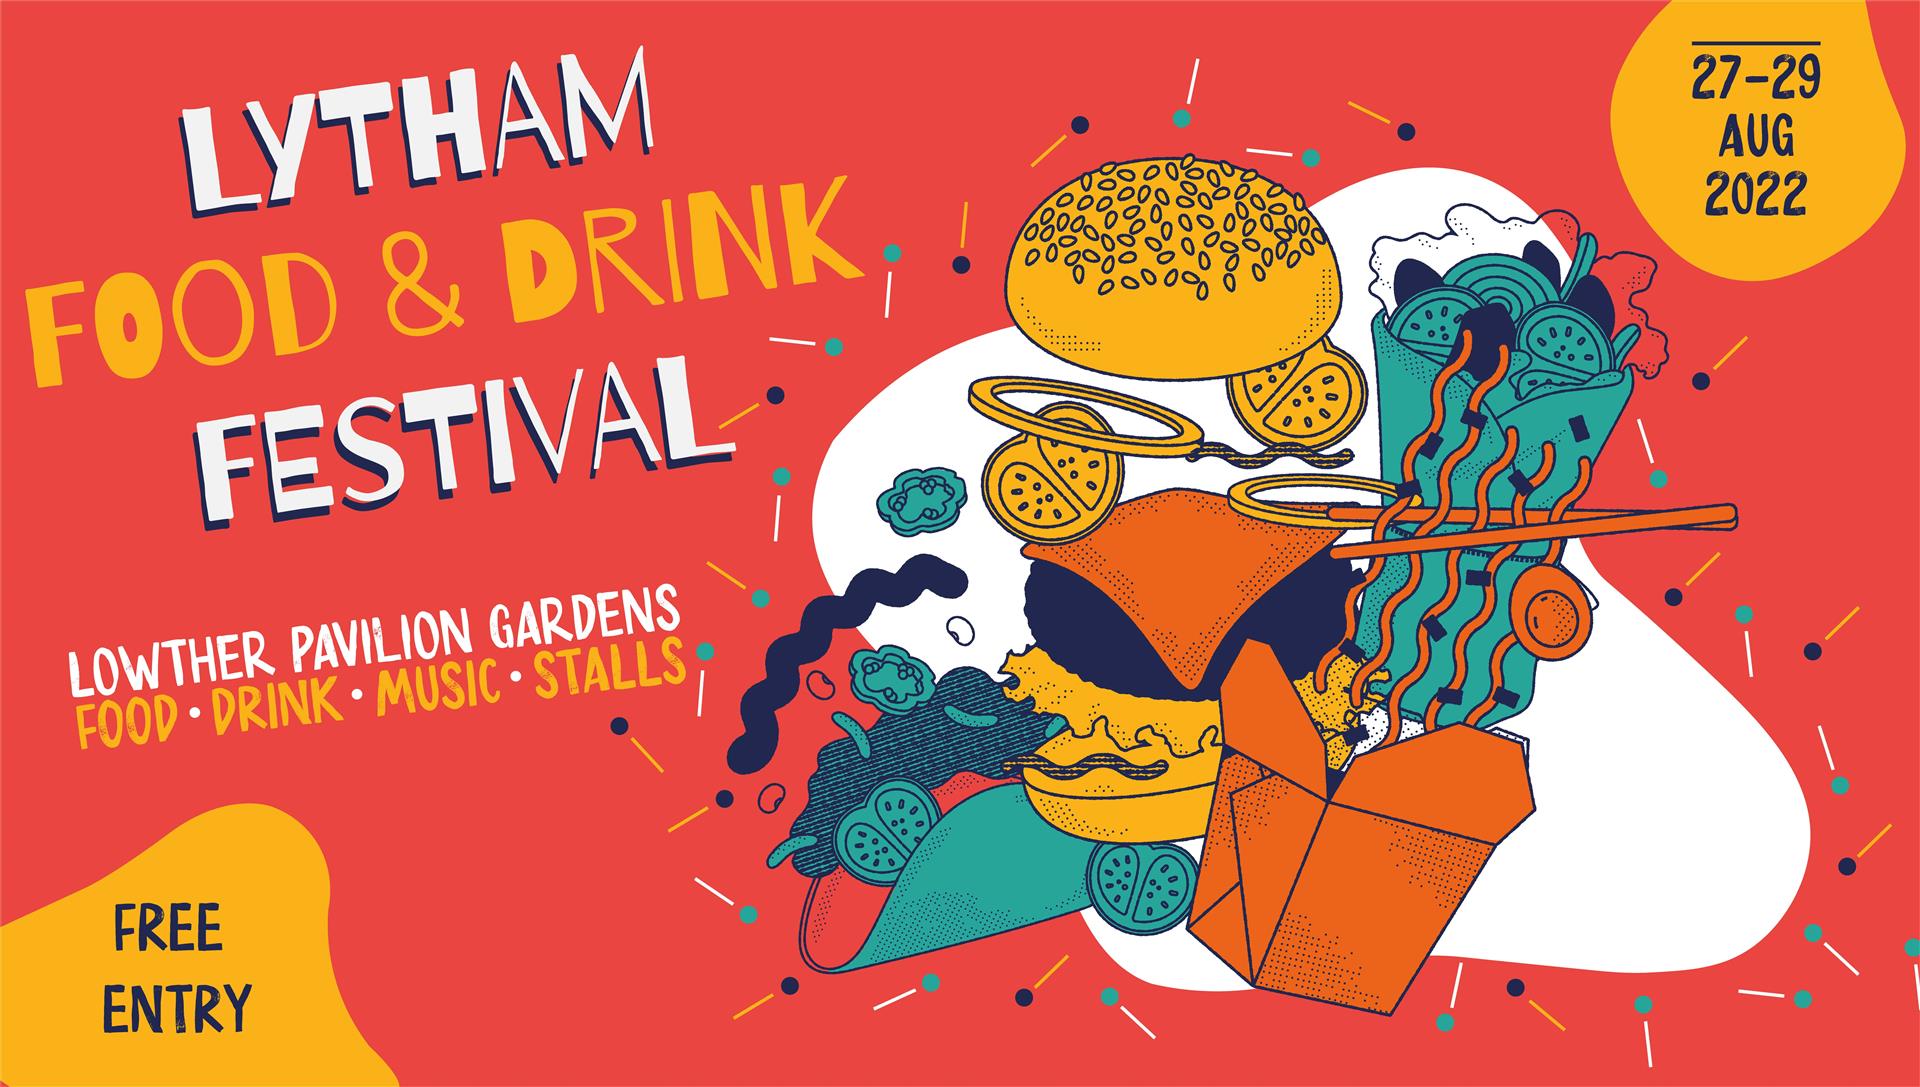 Lytham World Food & Drink Festival 2022 - Lowther Pavilion